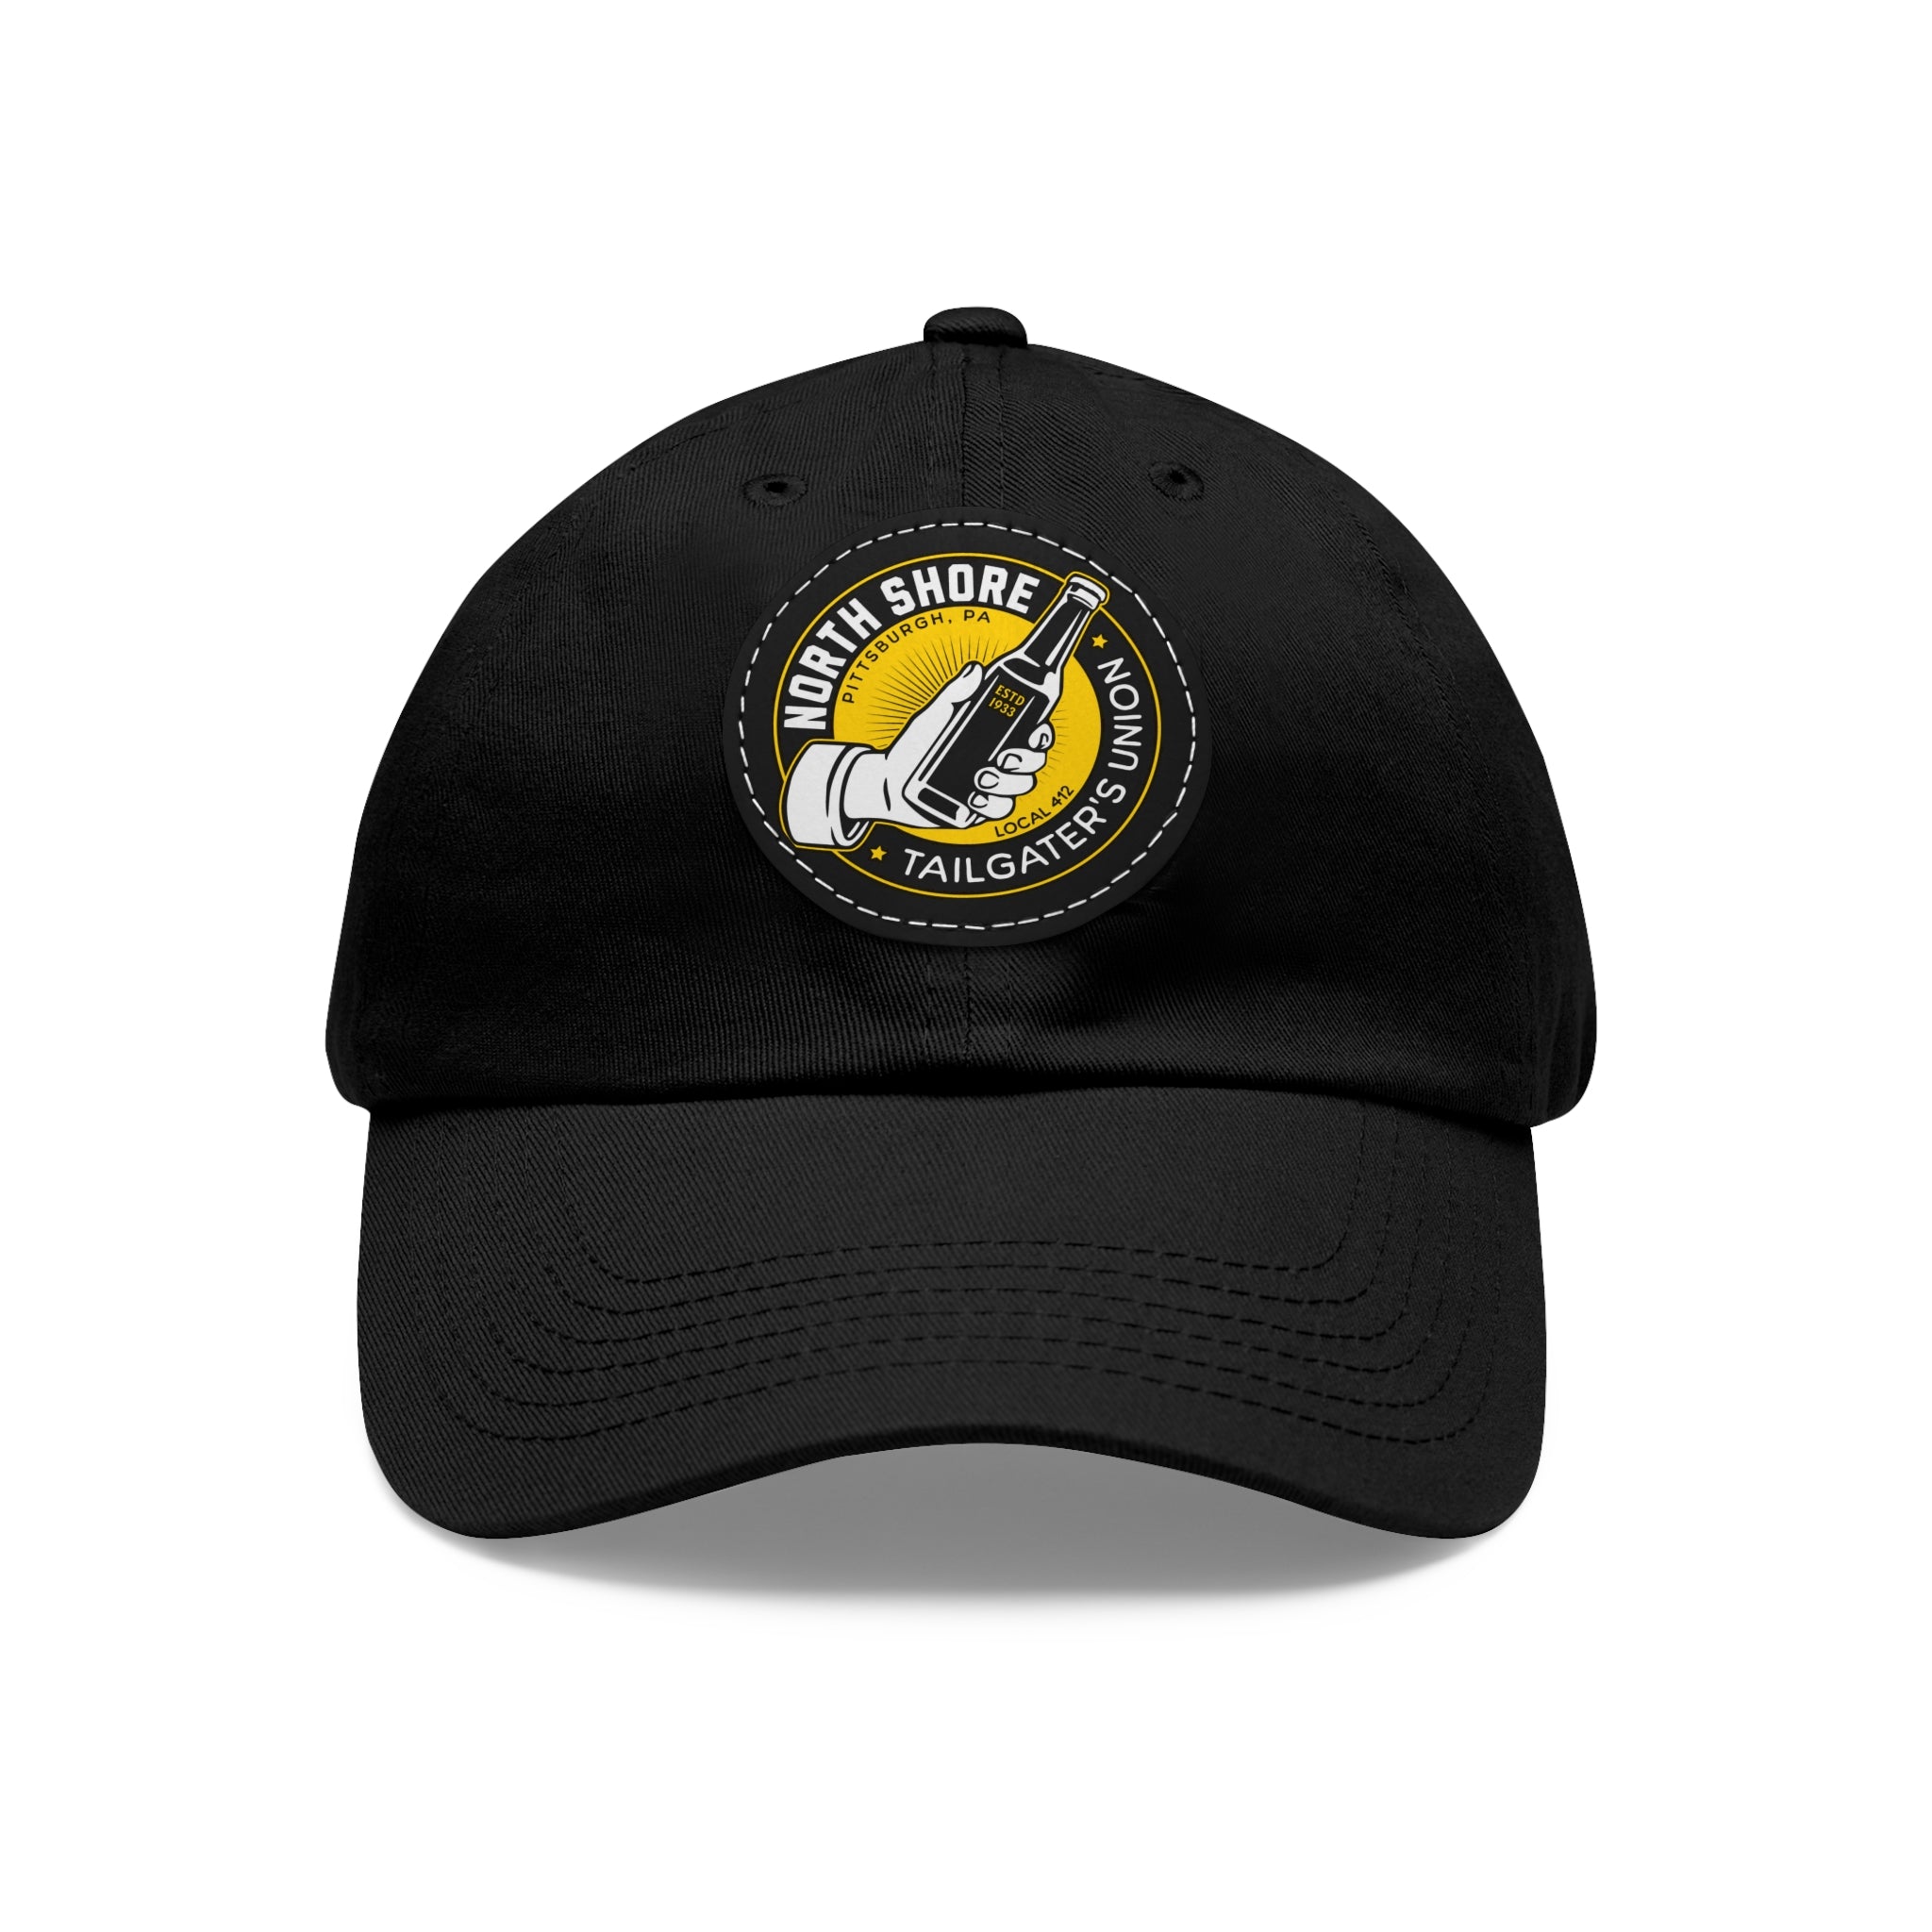 North Shore Tailgater's Union - Patch Hat